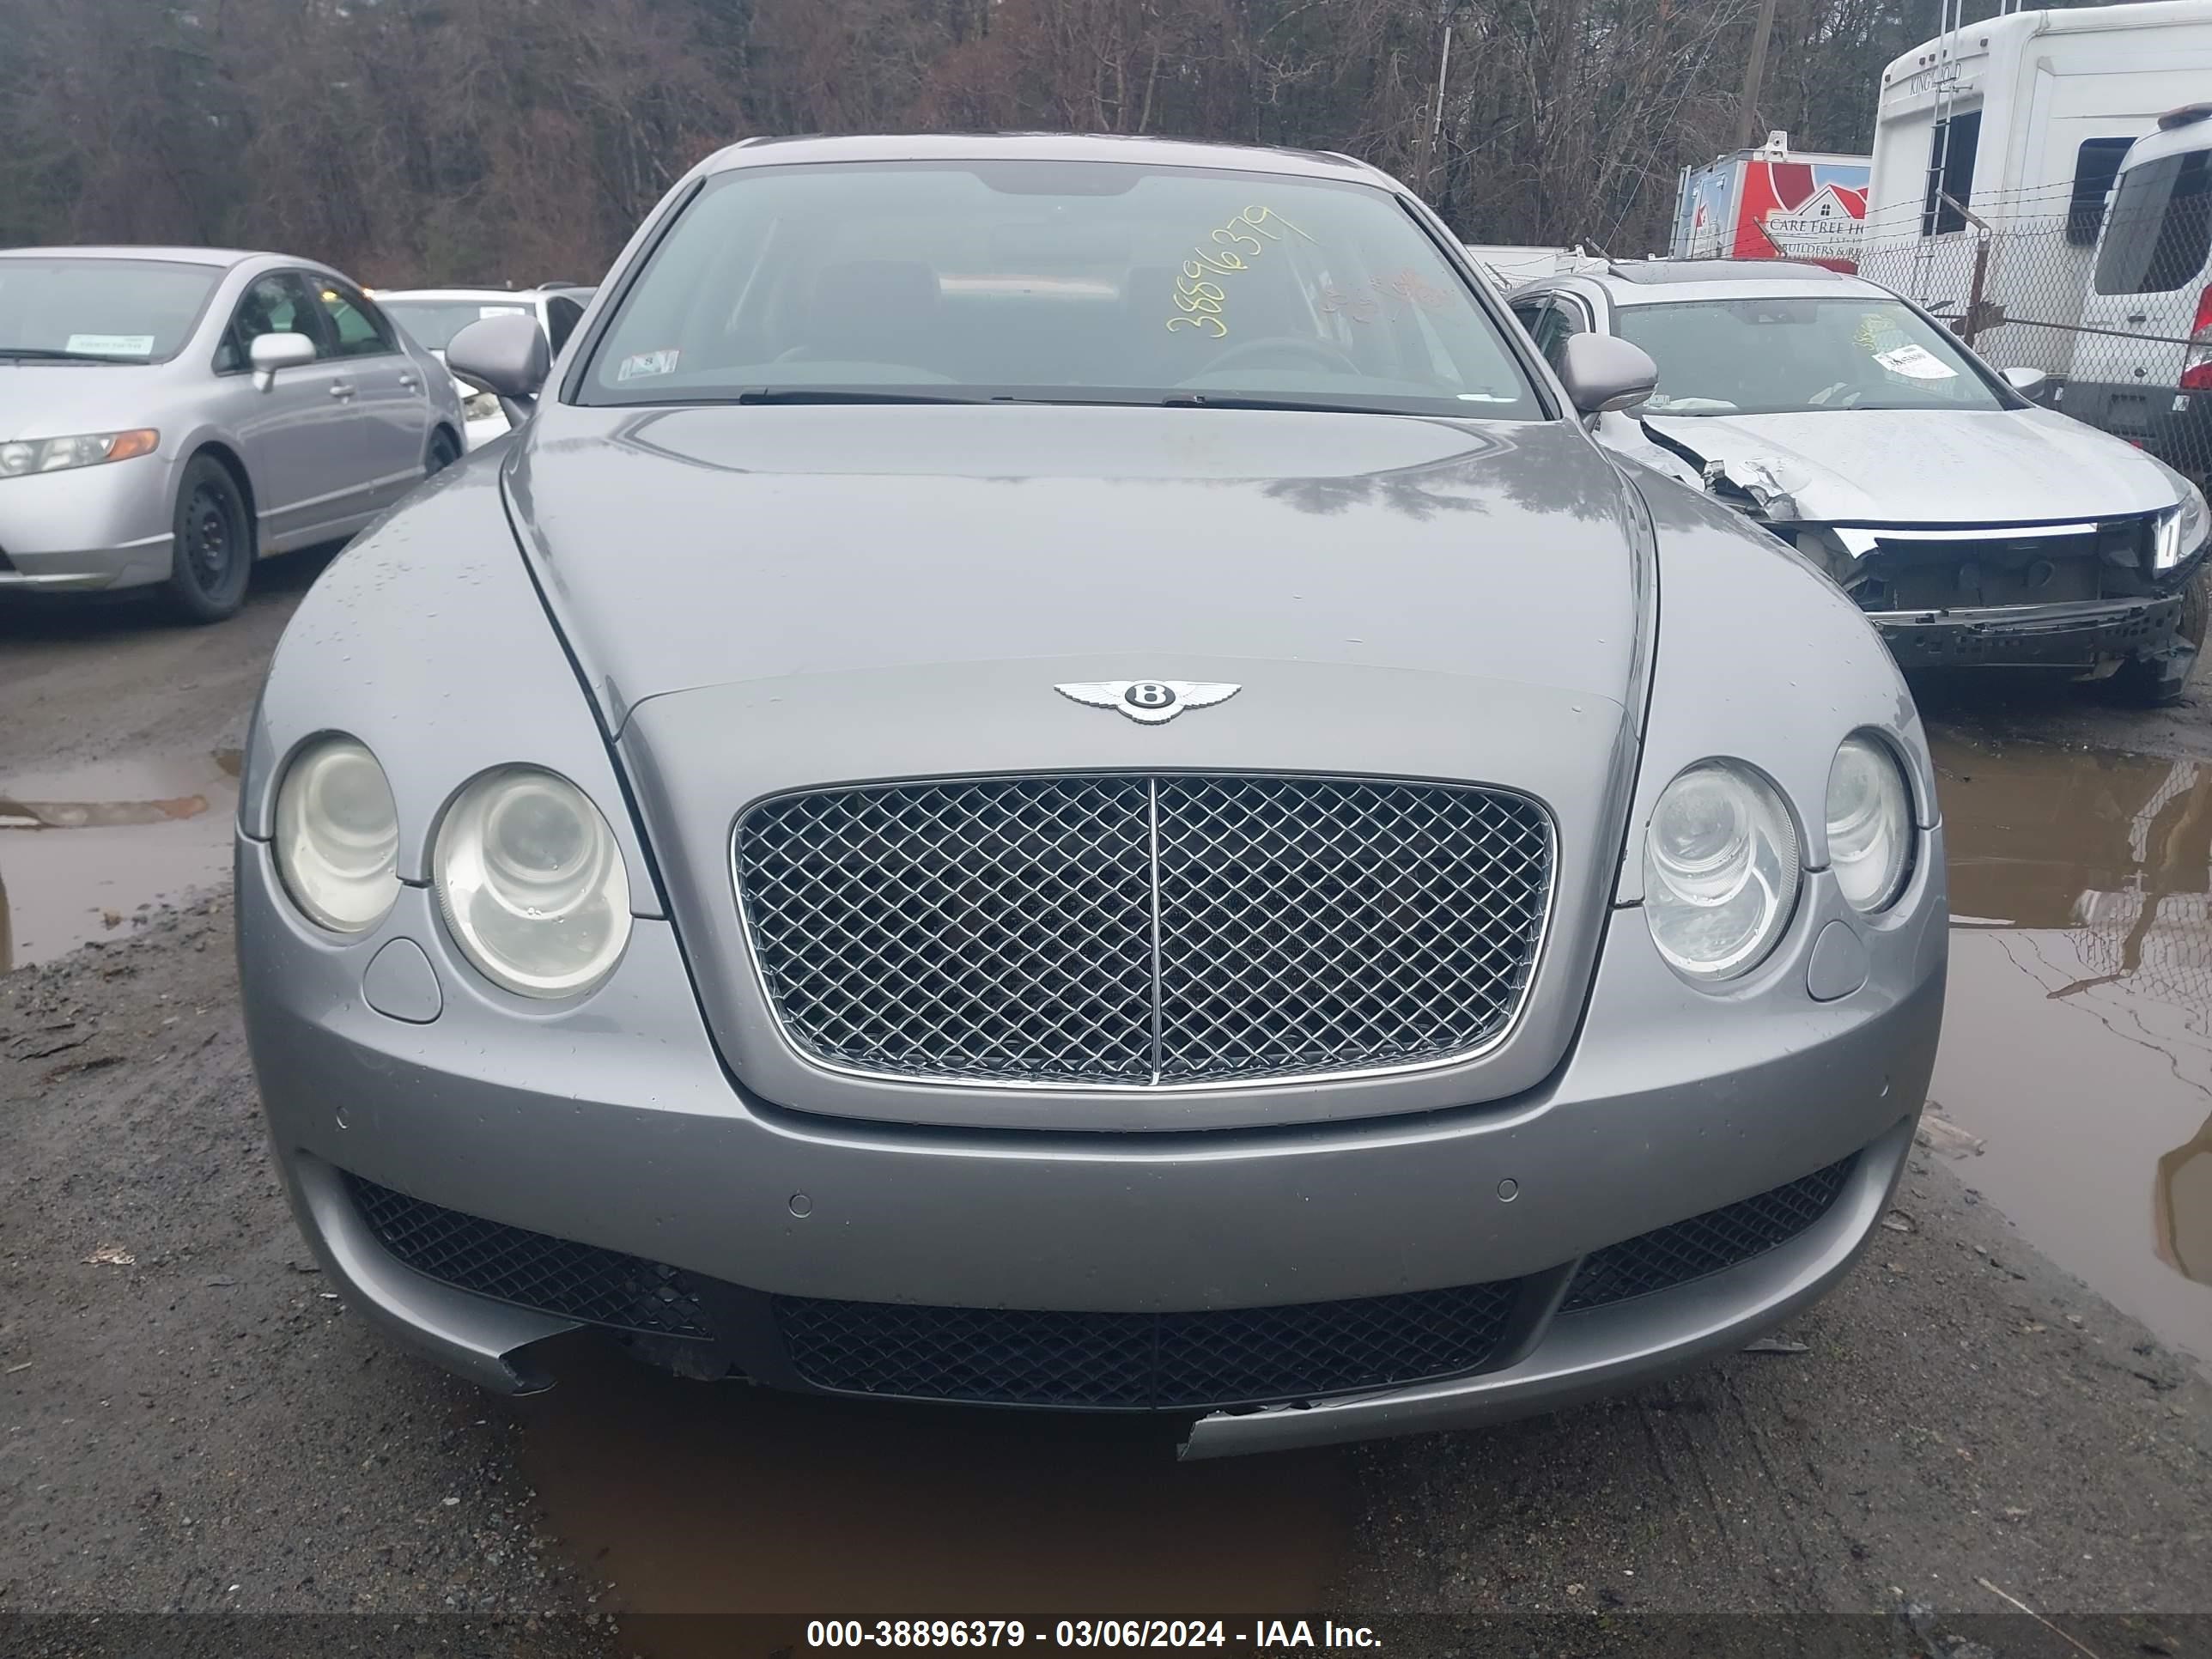 Photo 11 VIN: SCBBR53W26C035385 - BENTLEY CONTINENTAL FLYING SPUR 